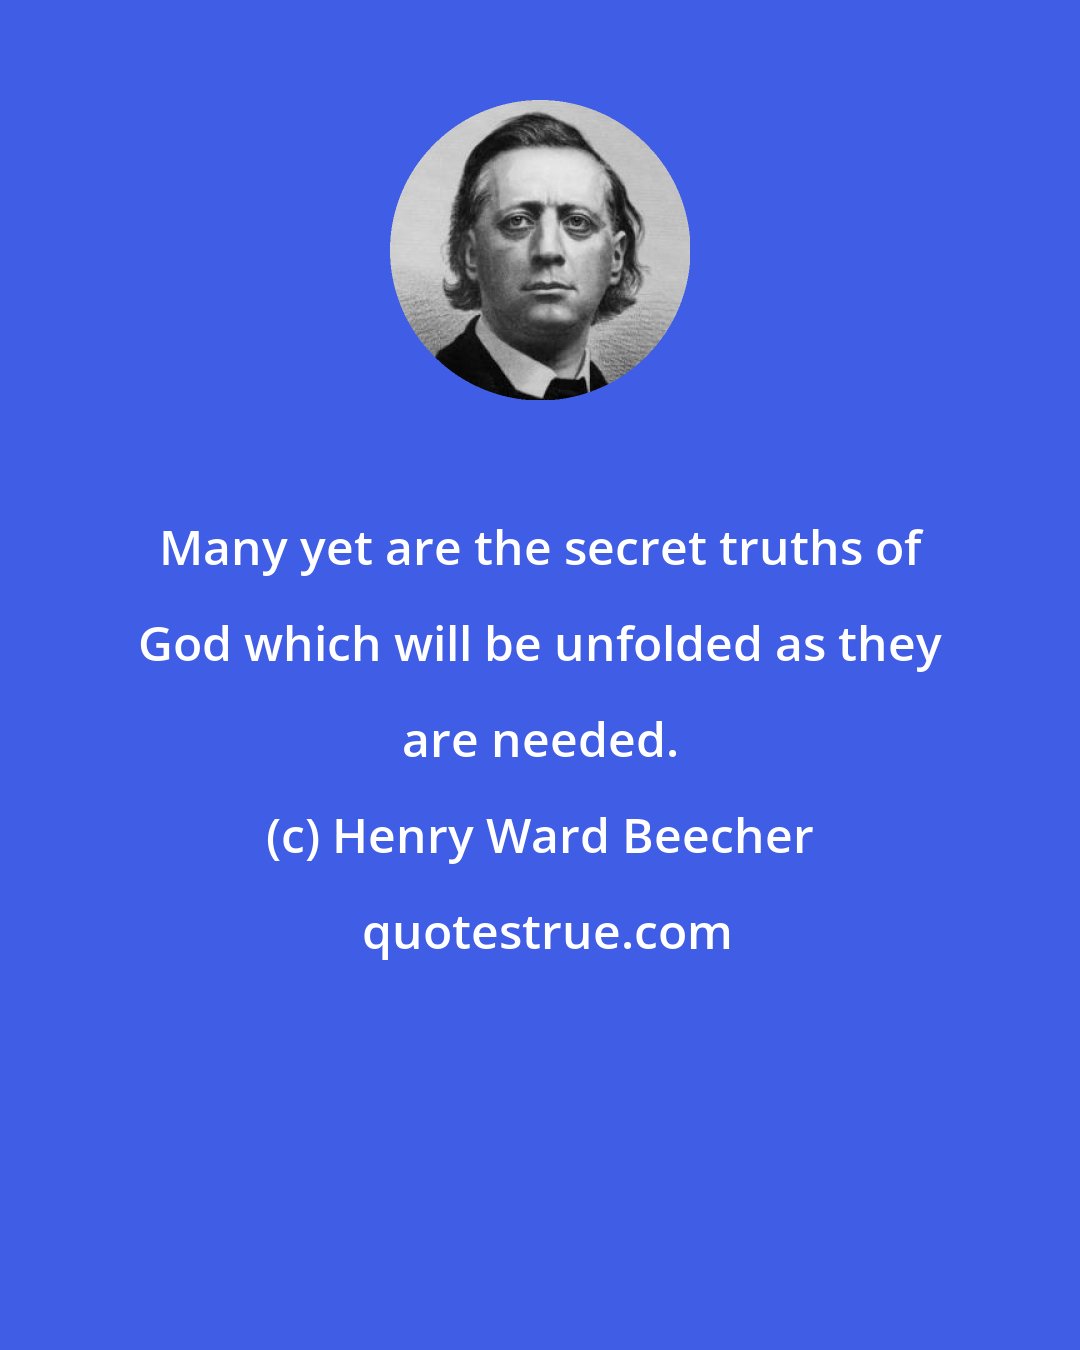 Henry Ward Beecher: Many yet are the secret truths of God which will be unfolded as they are needed.